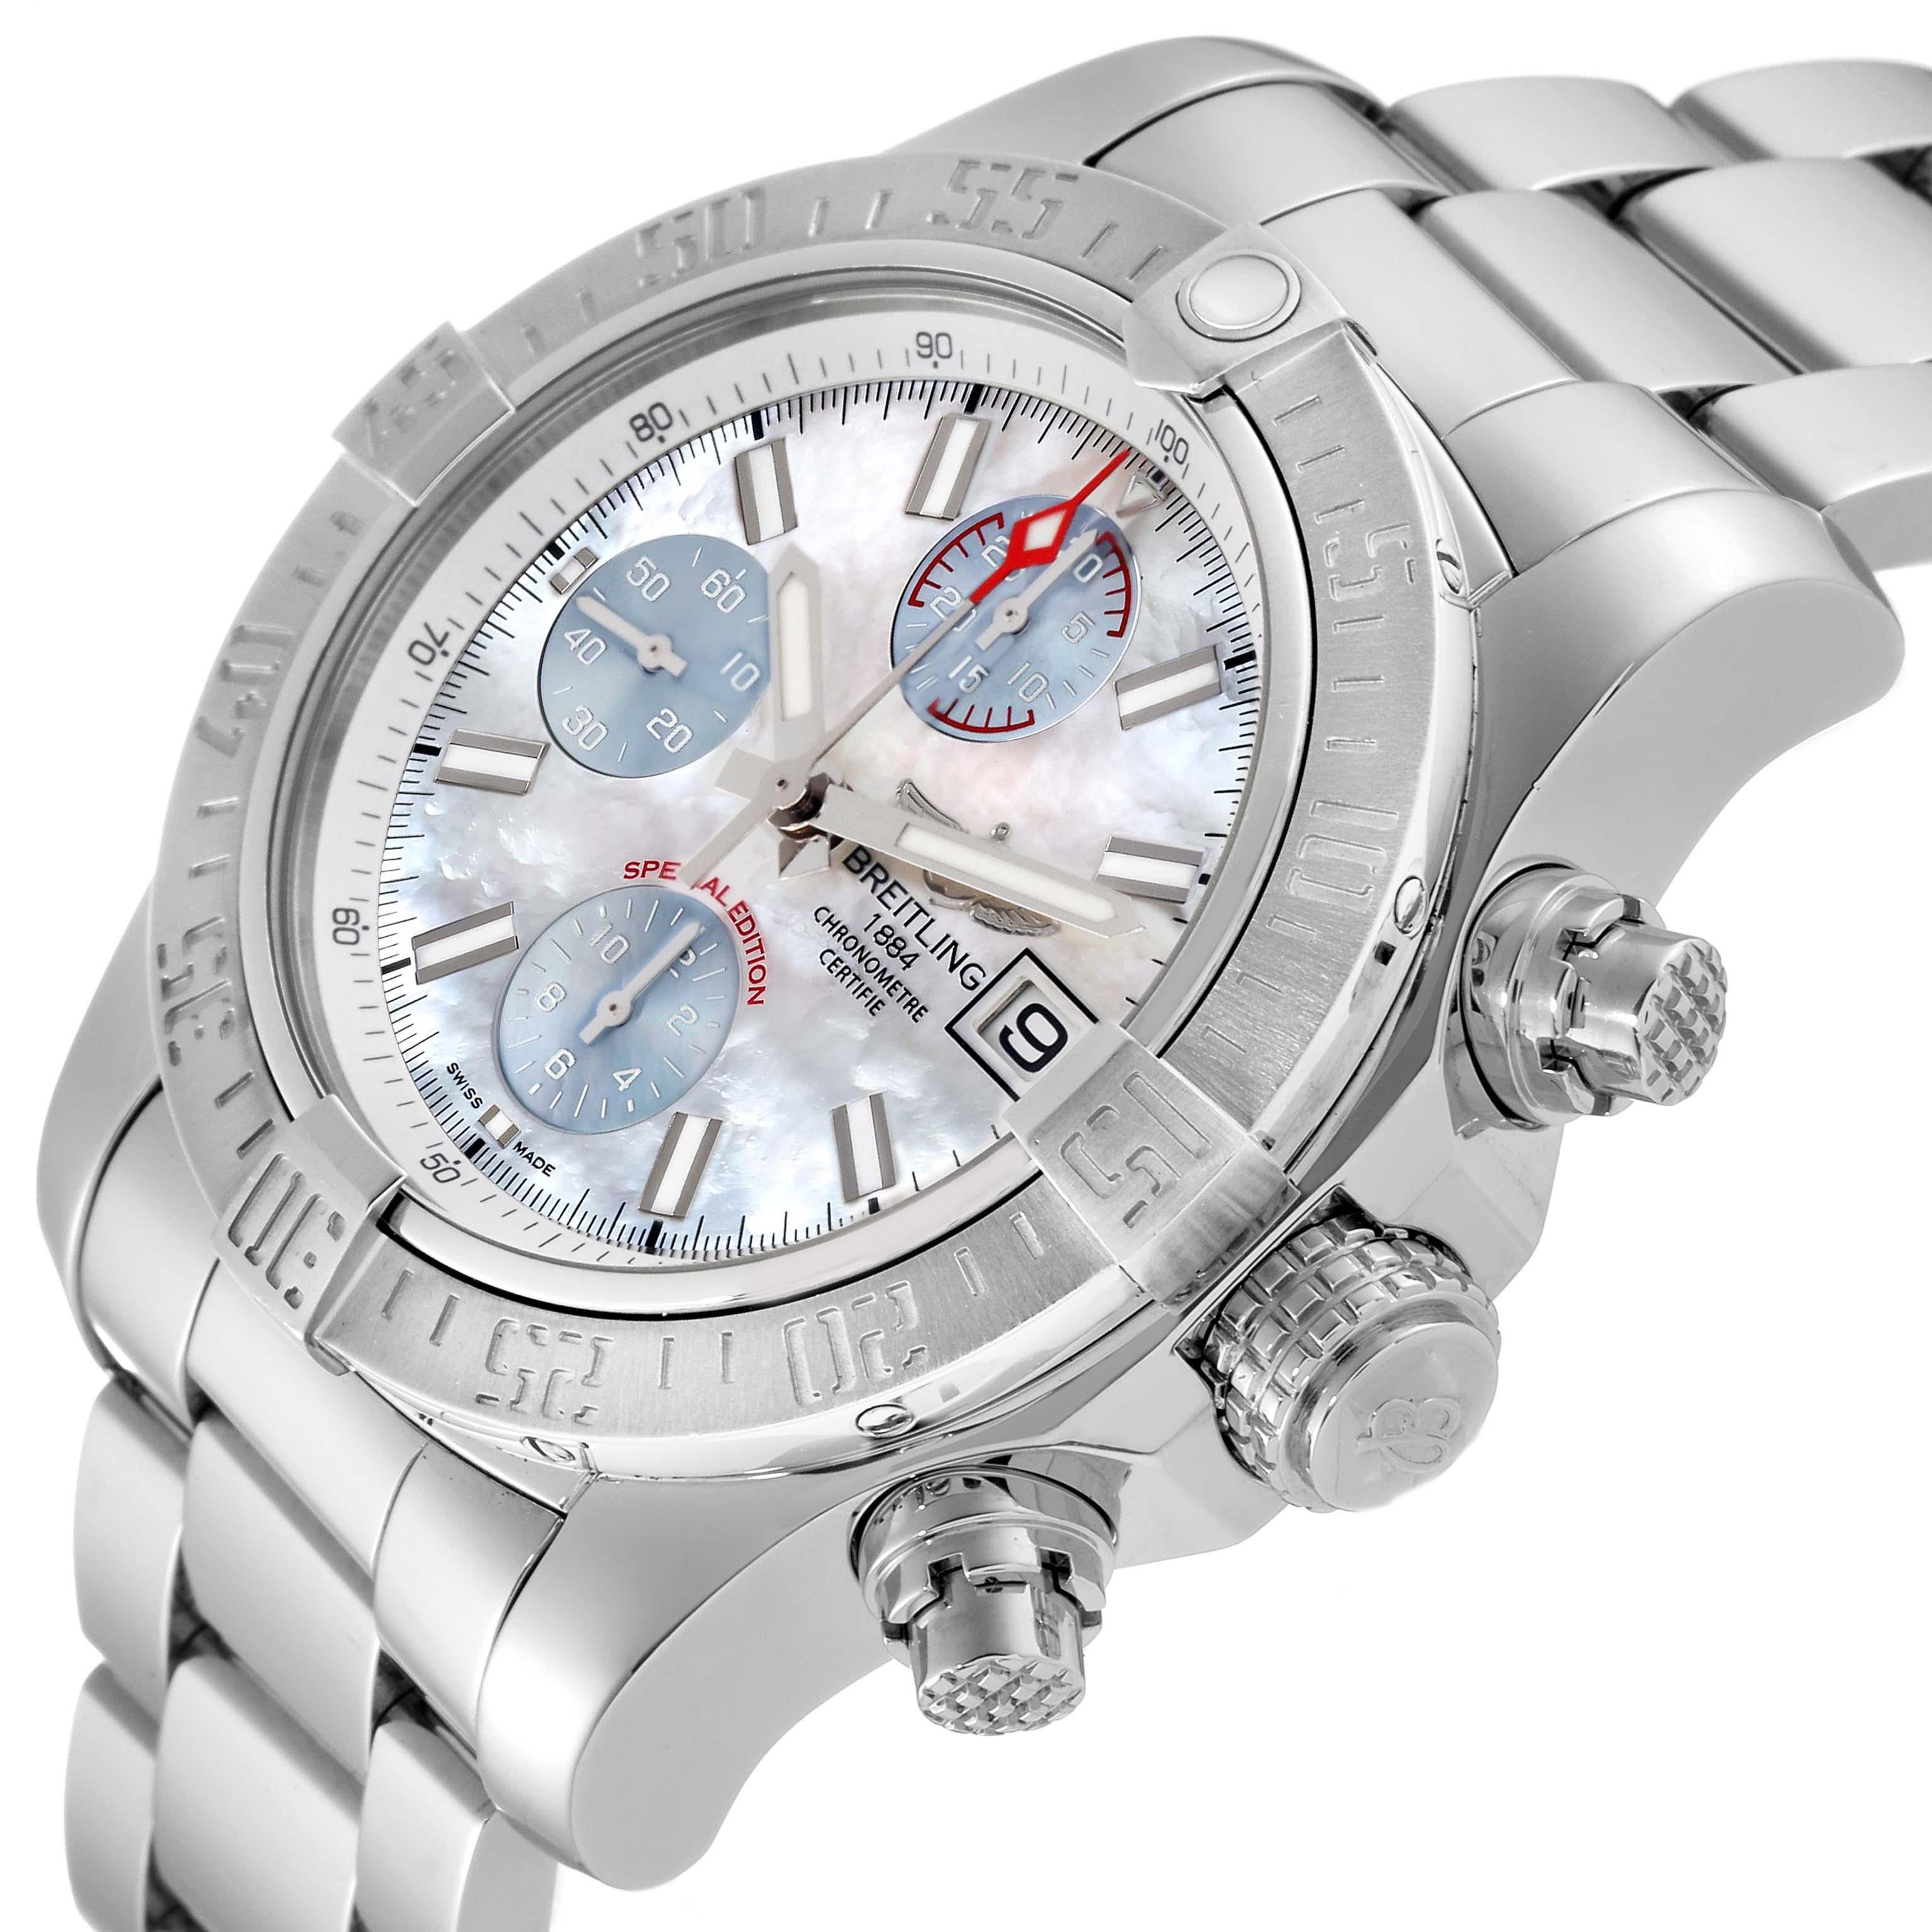 Breitling Avenger II Mother of Pearl Special Edition Steel Mens Watch A13381 Box Card. Automatic self-winding movement. Chronograph function. Stainless steel case 43 mm in diameter with screwed-down crown. Stainless steel unidirectional rotating